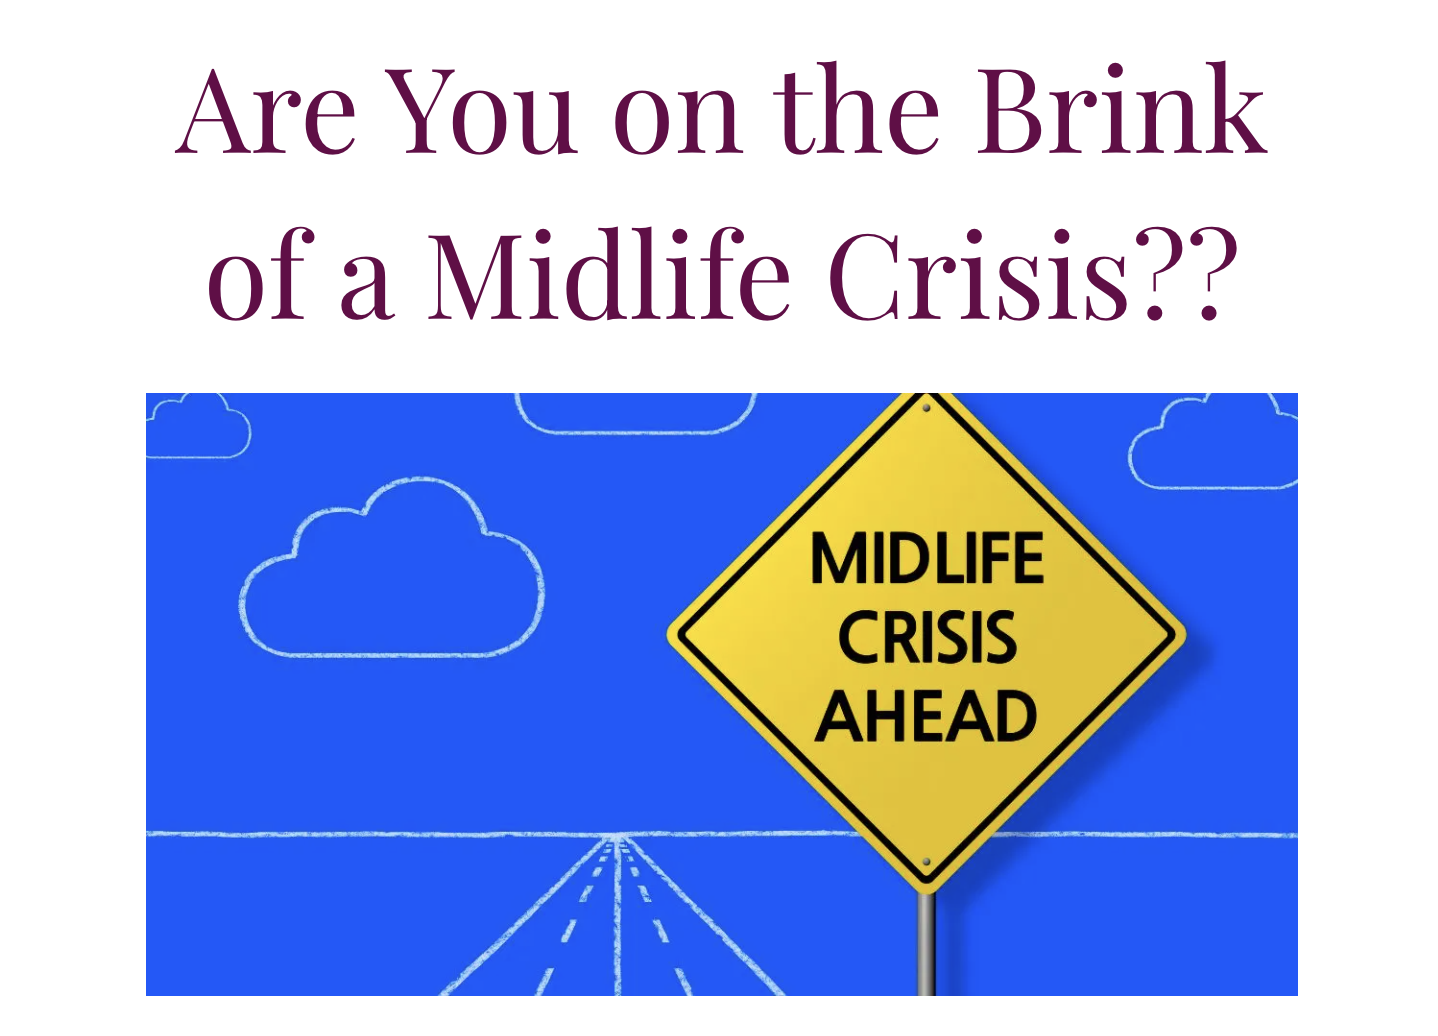 Are You on the Brink of a Midlife Crisis?